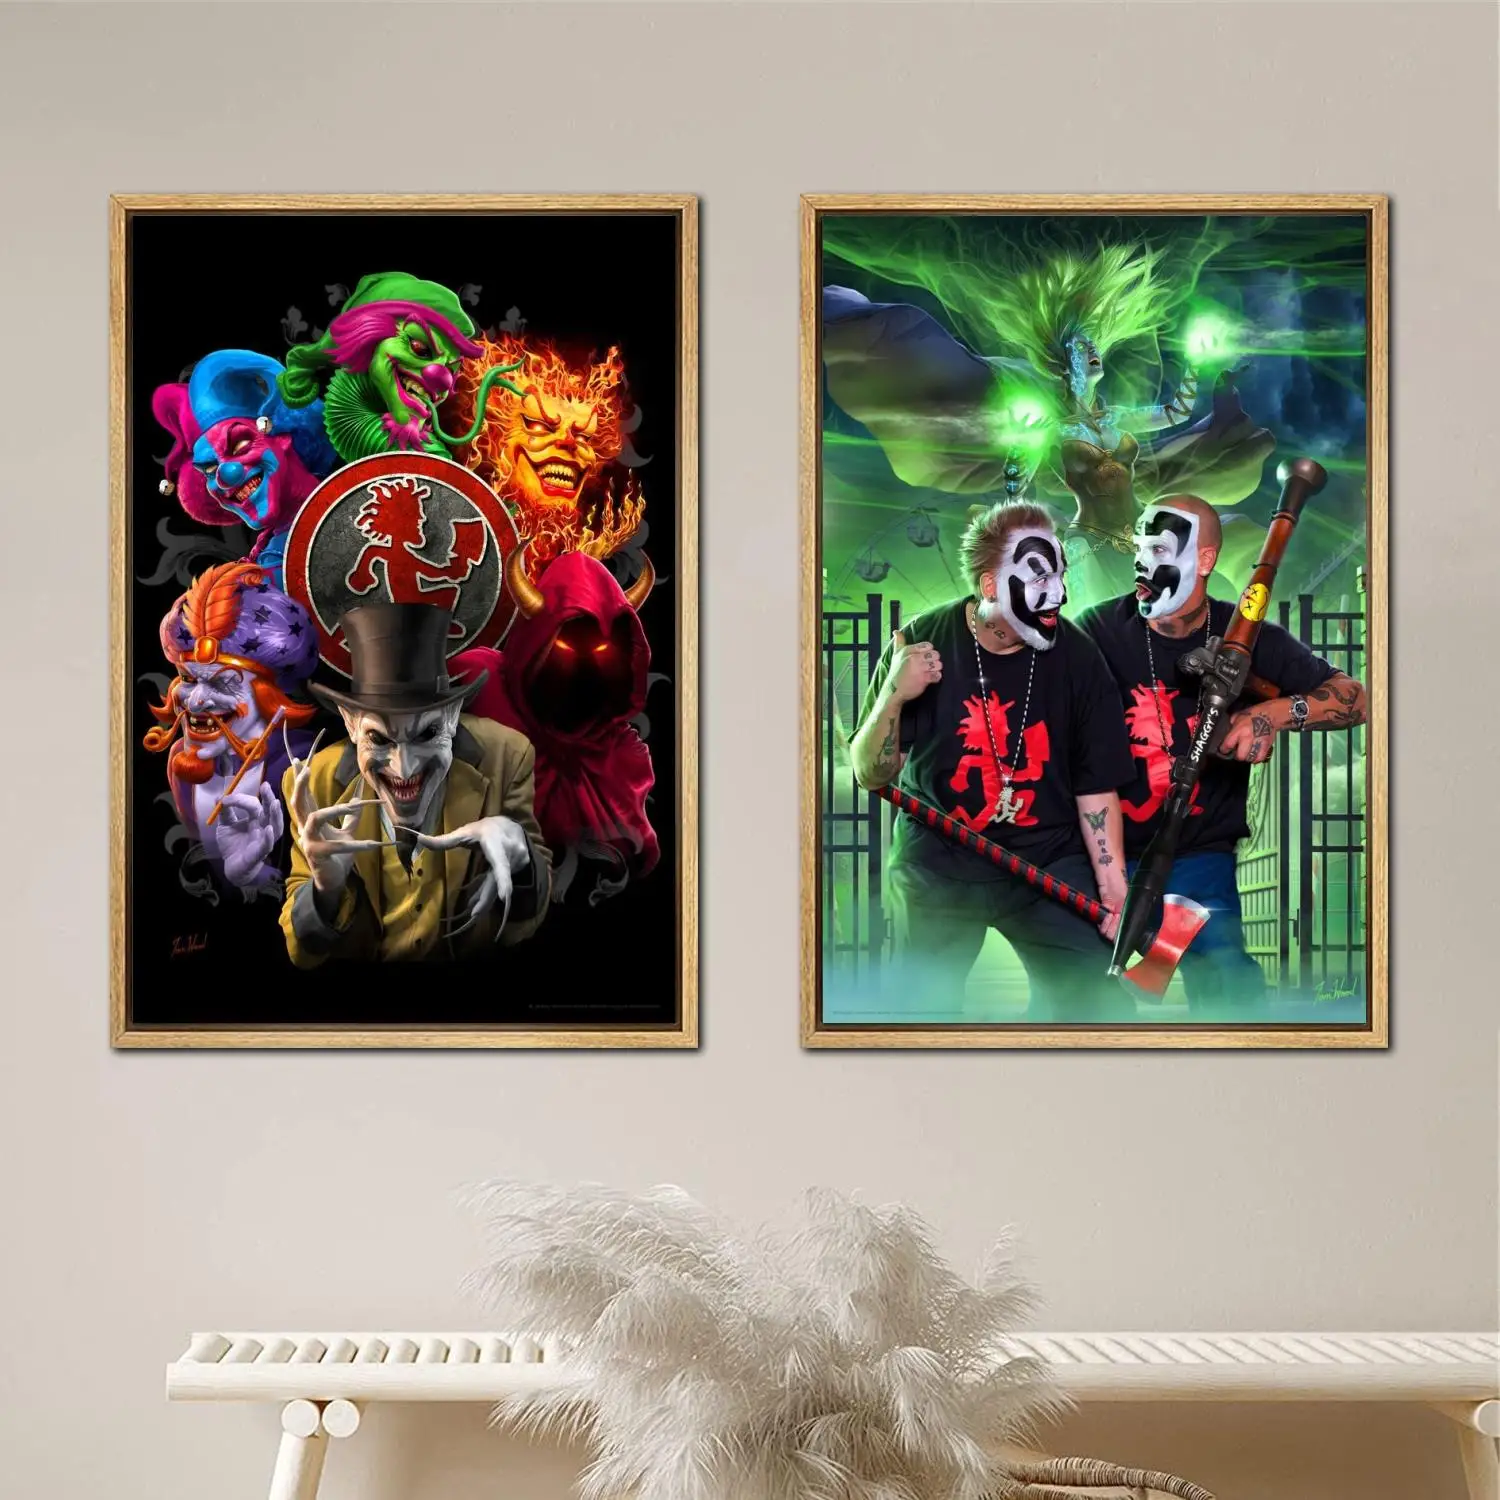 

insane clown posse Poster Painting 24x36 Wall Art Canvas Posters room decor Modern Family bedroom Decoration Art wall decor